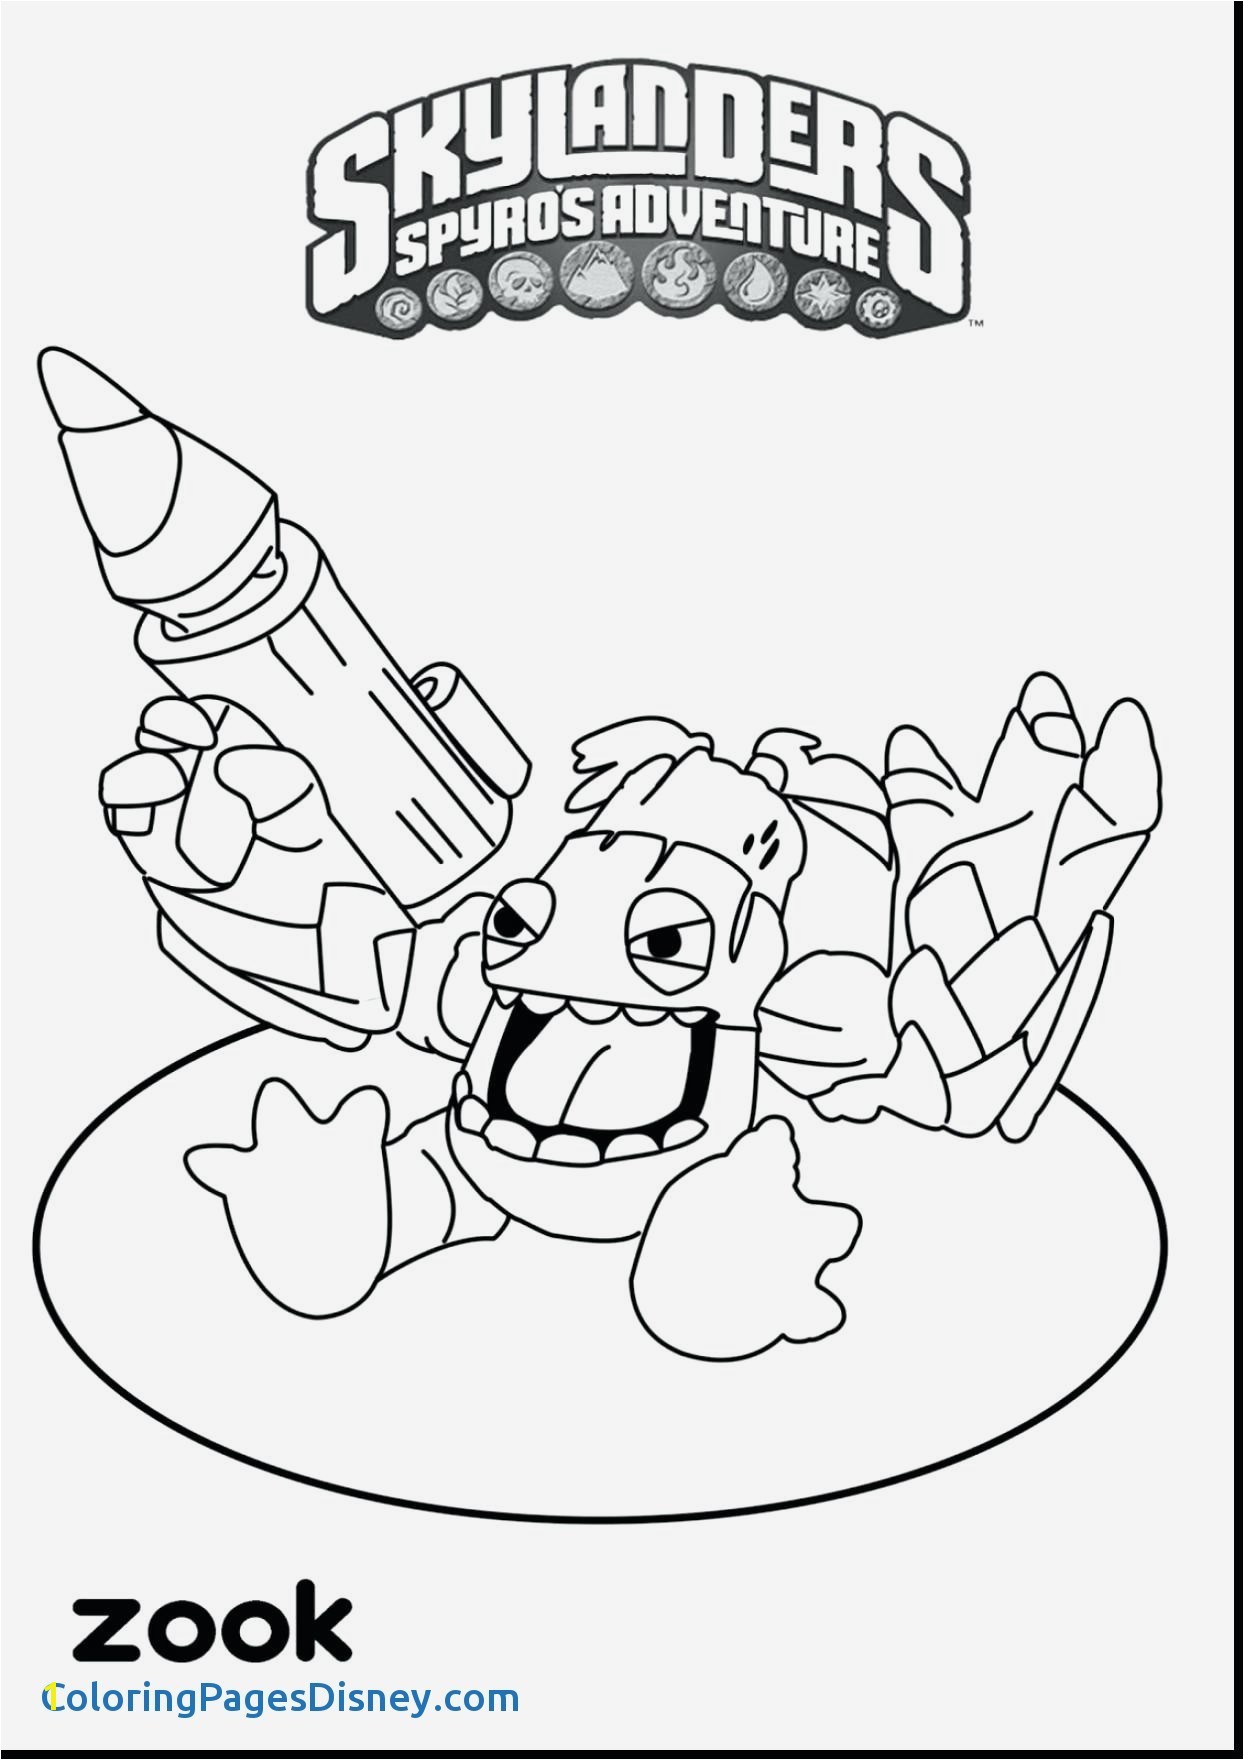 Lego Printable Coloring Pages Beautiful Printable Coloring Pages for Girls Lovely Printable Cds 0d – Fun